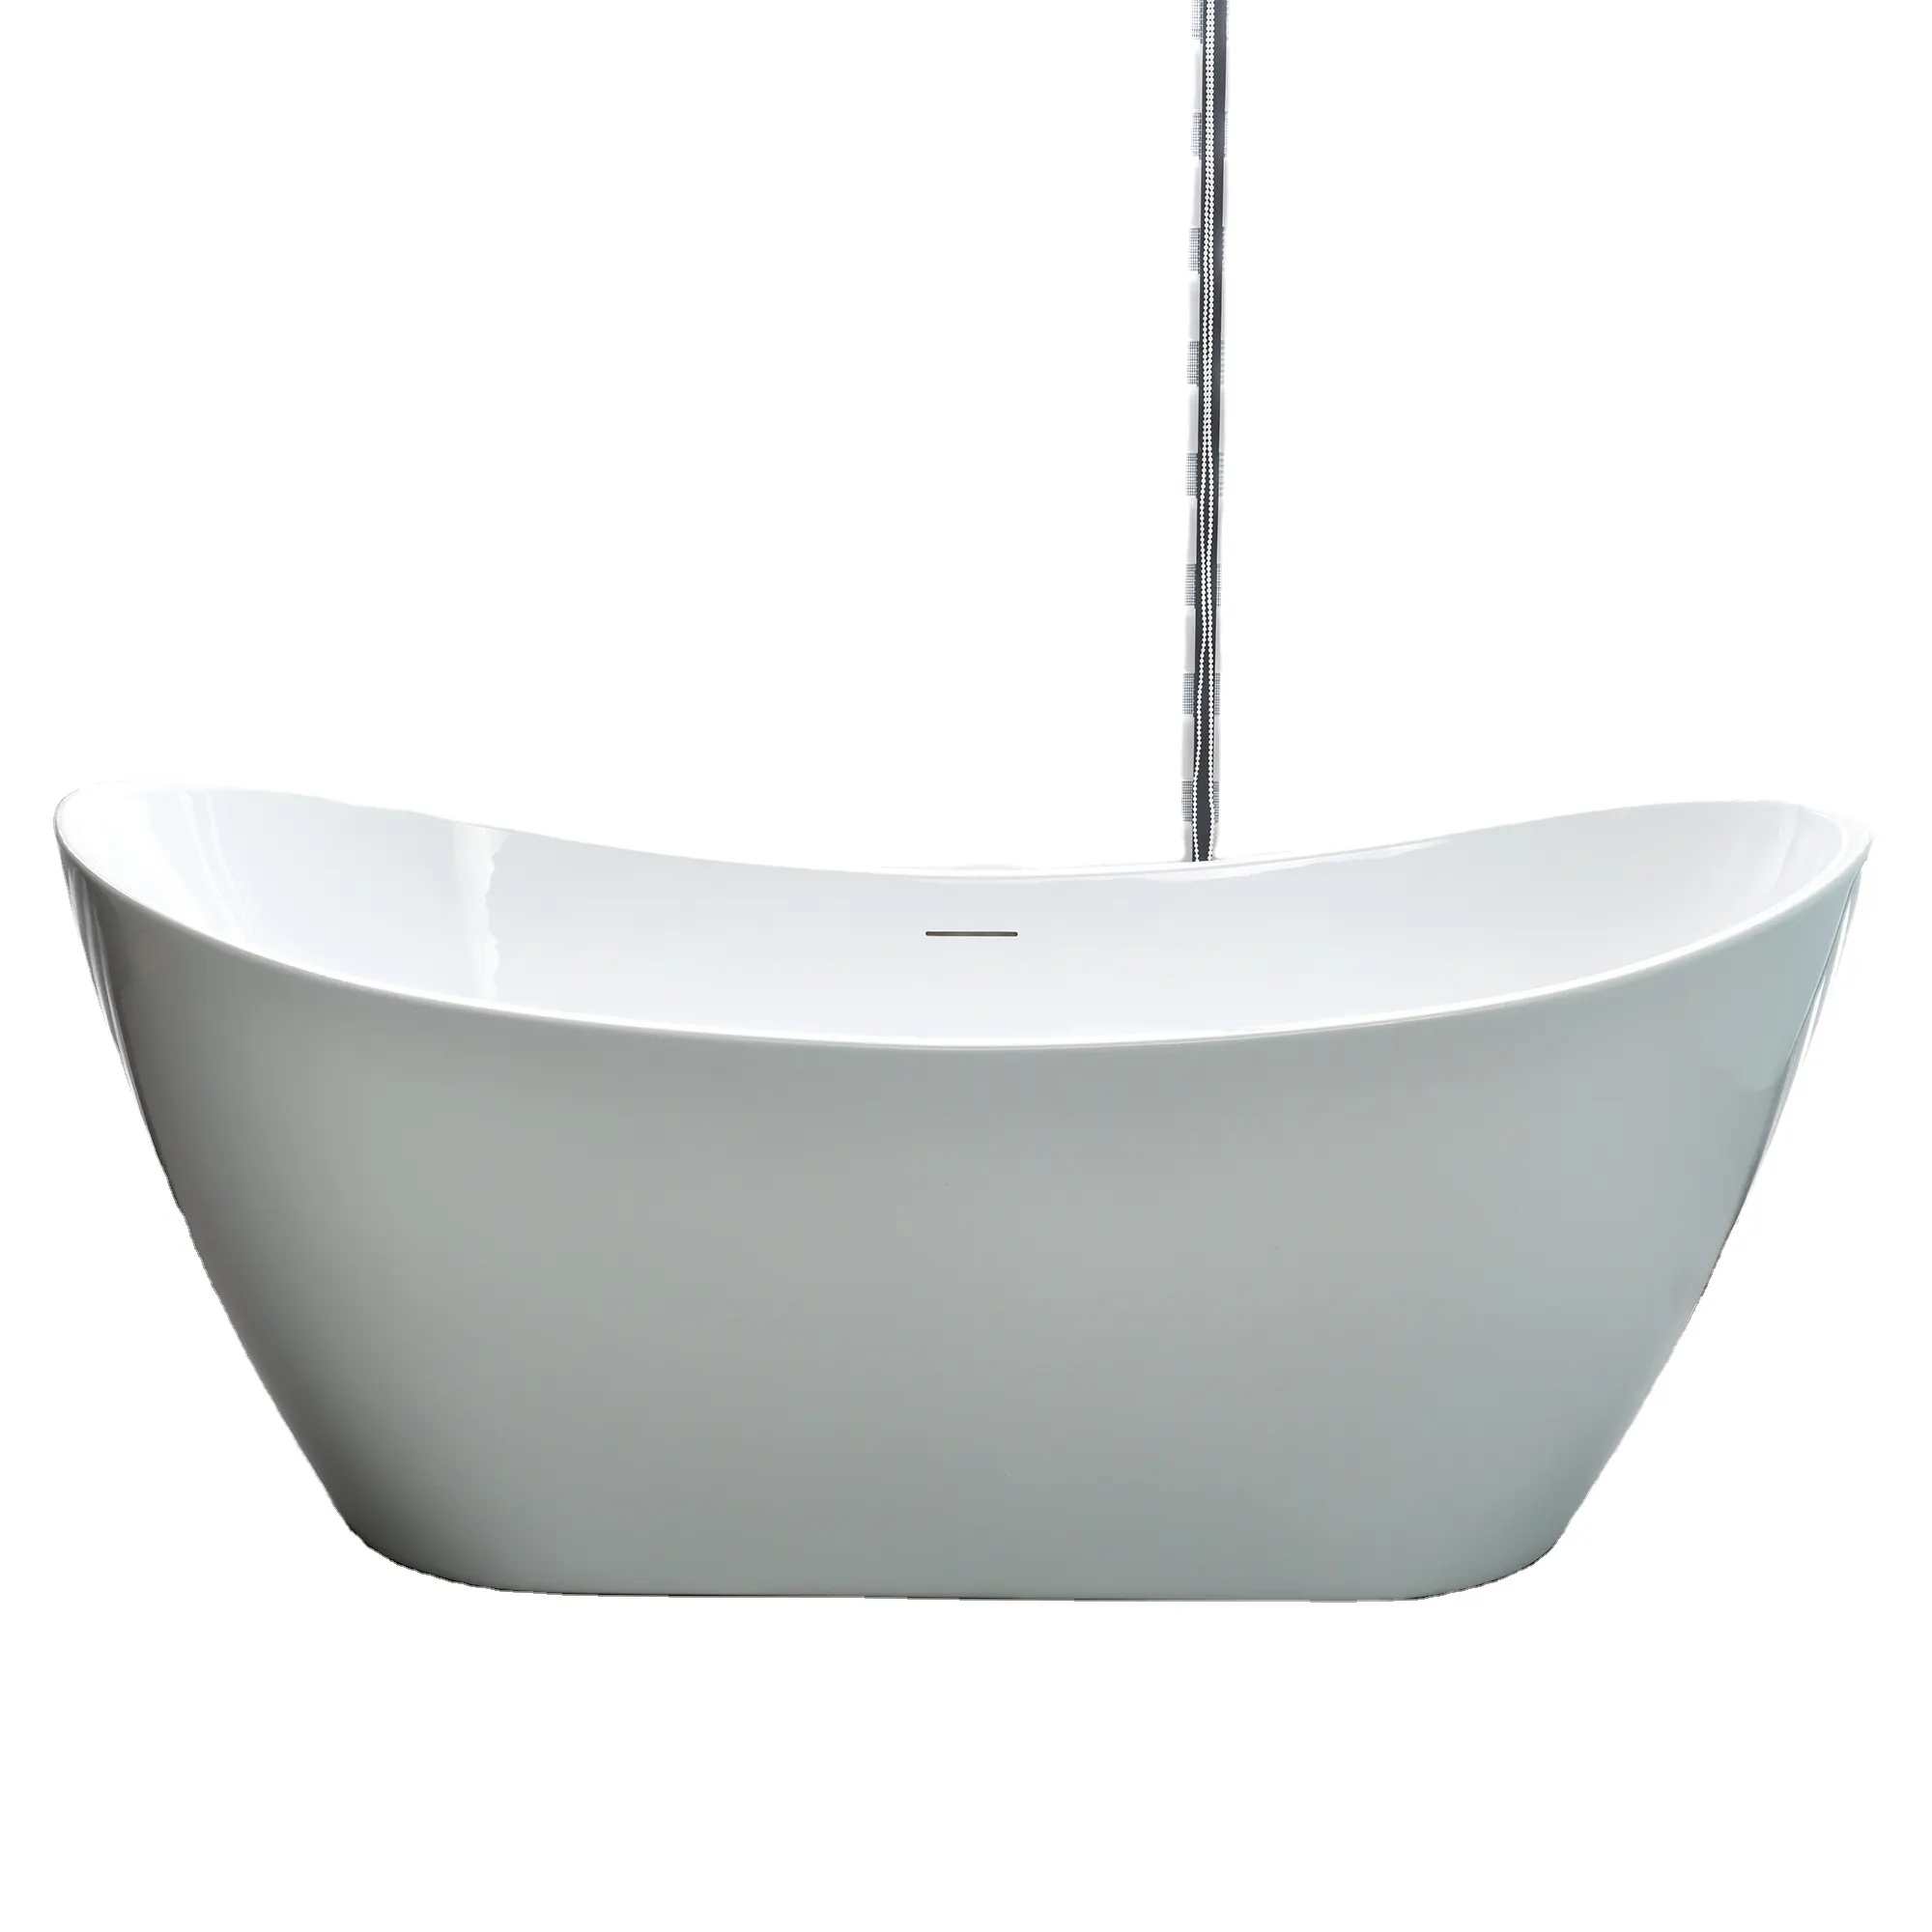 CUPC Factory The Best Price And The Best Quality Manufacturer Freestanding Bathtub / Hot Tub Soaking Tub Bathtubs For Hotel